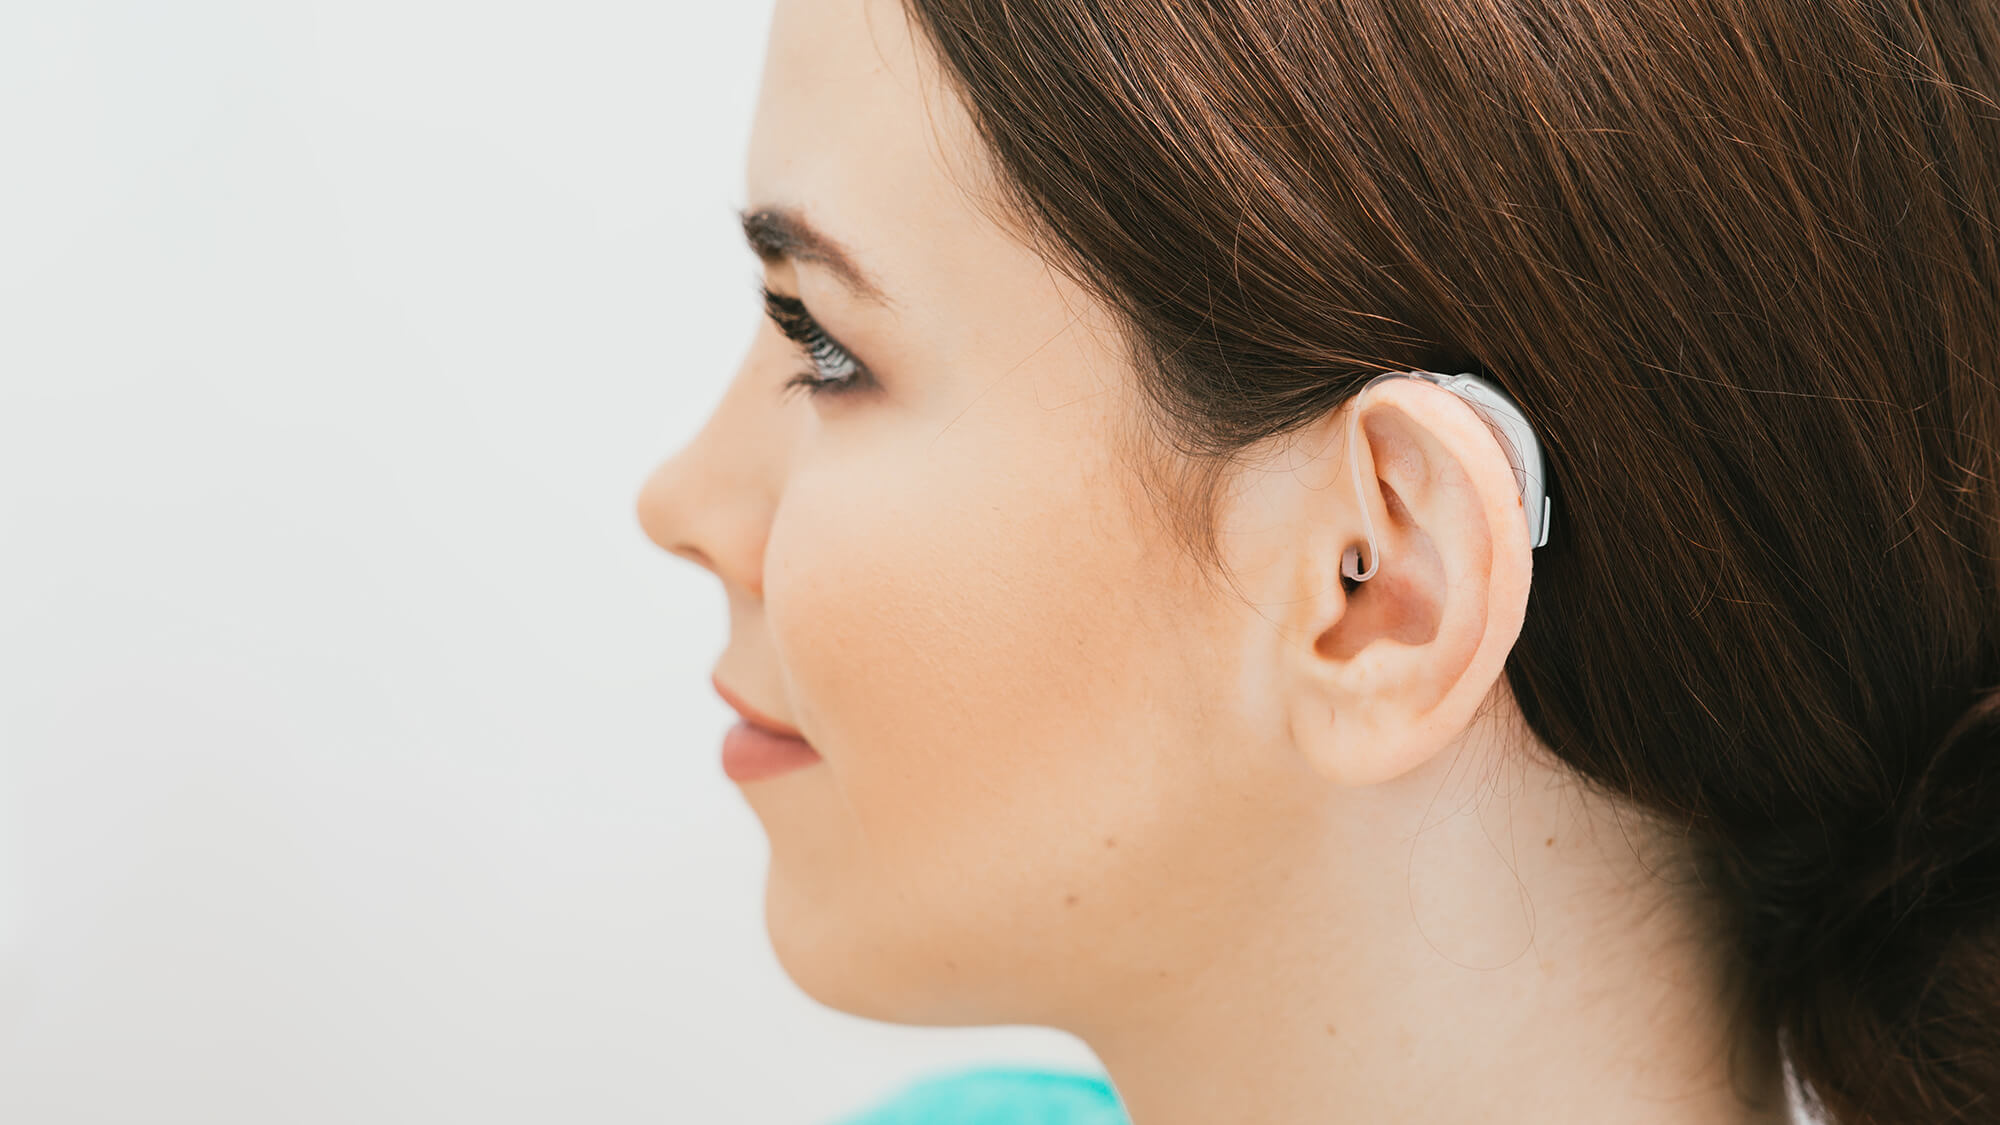 Featured image for “They’re coming: The Future of Over the Counter Hearing Aids”